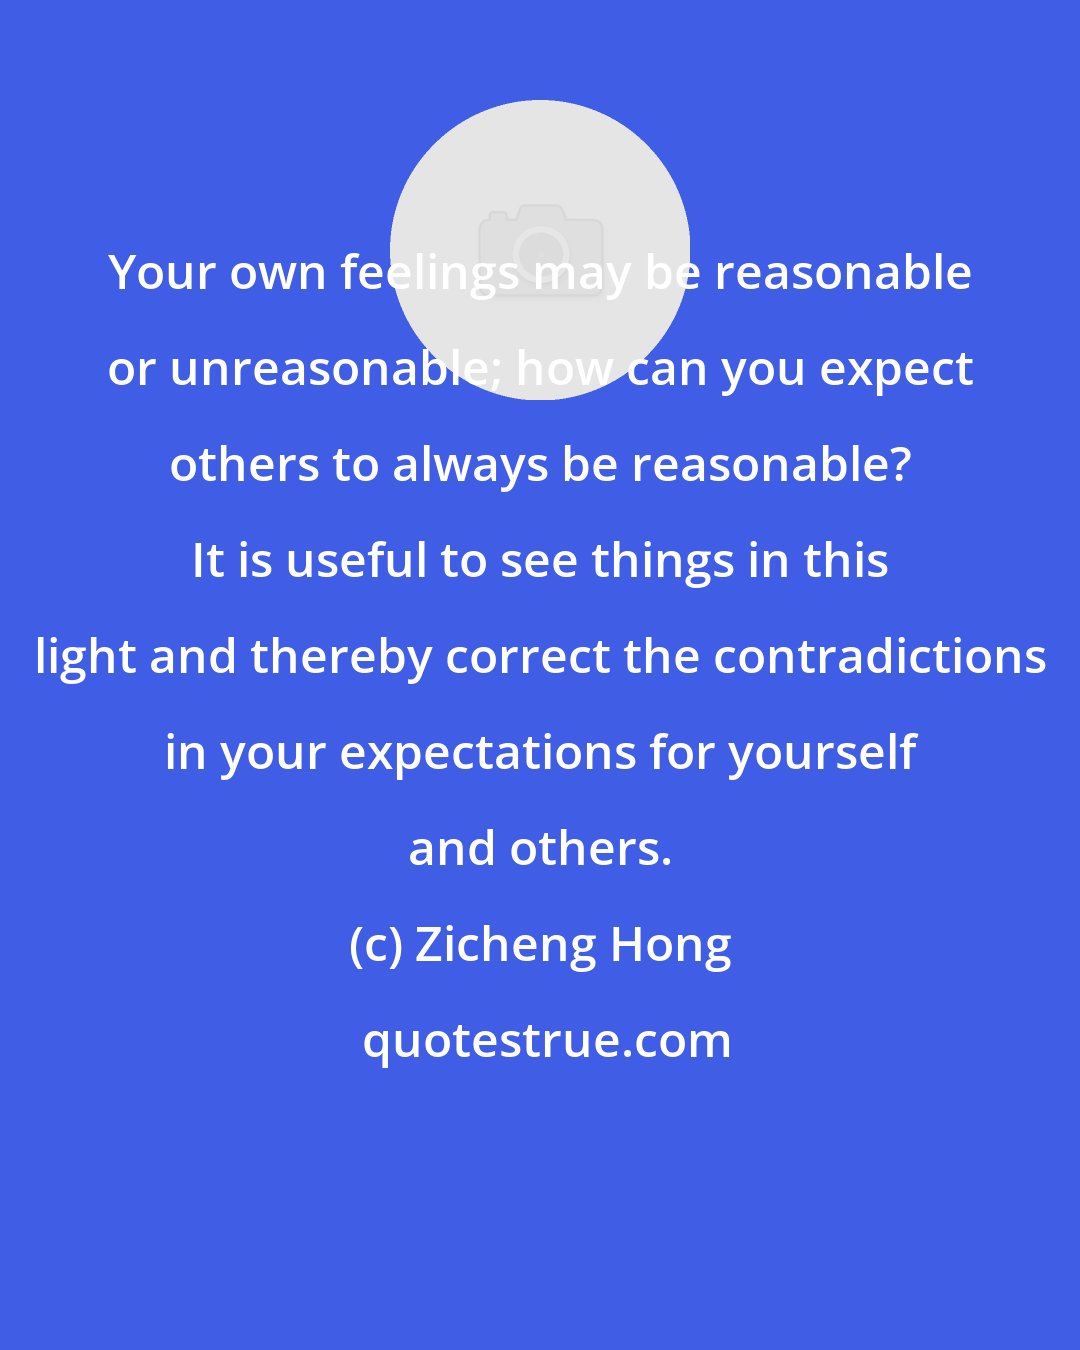 Zicheng Hong: Your own feelings may be reasonable or unreasonable; how can you expect others to always be reasonable? It is useful to see things in this light and thereby correct the contradictions in your expectations for yourself and others.